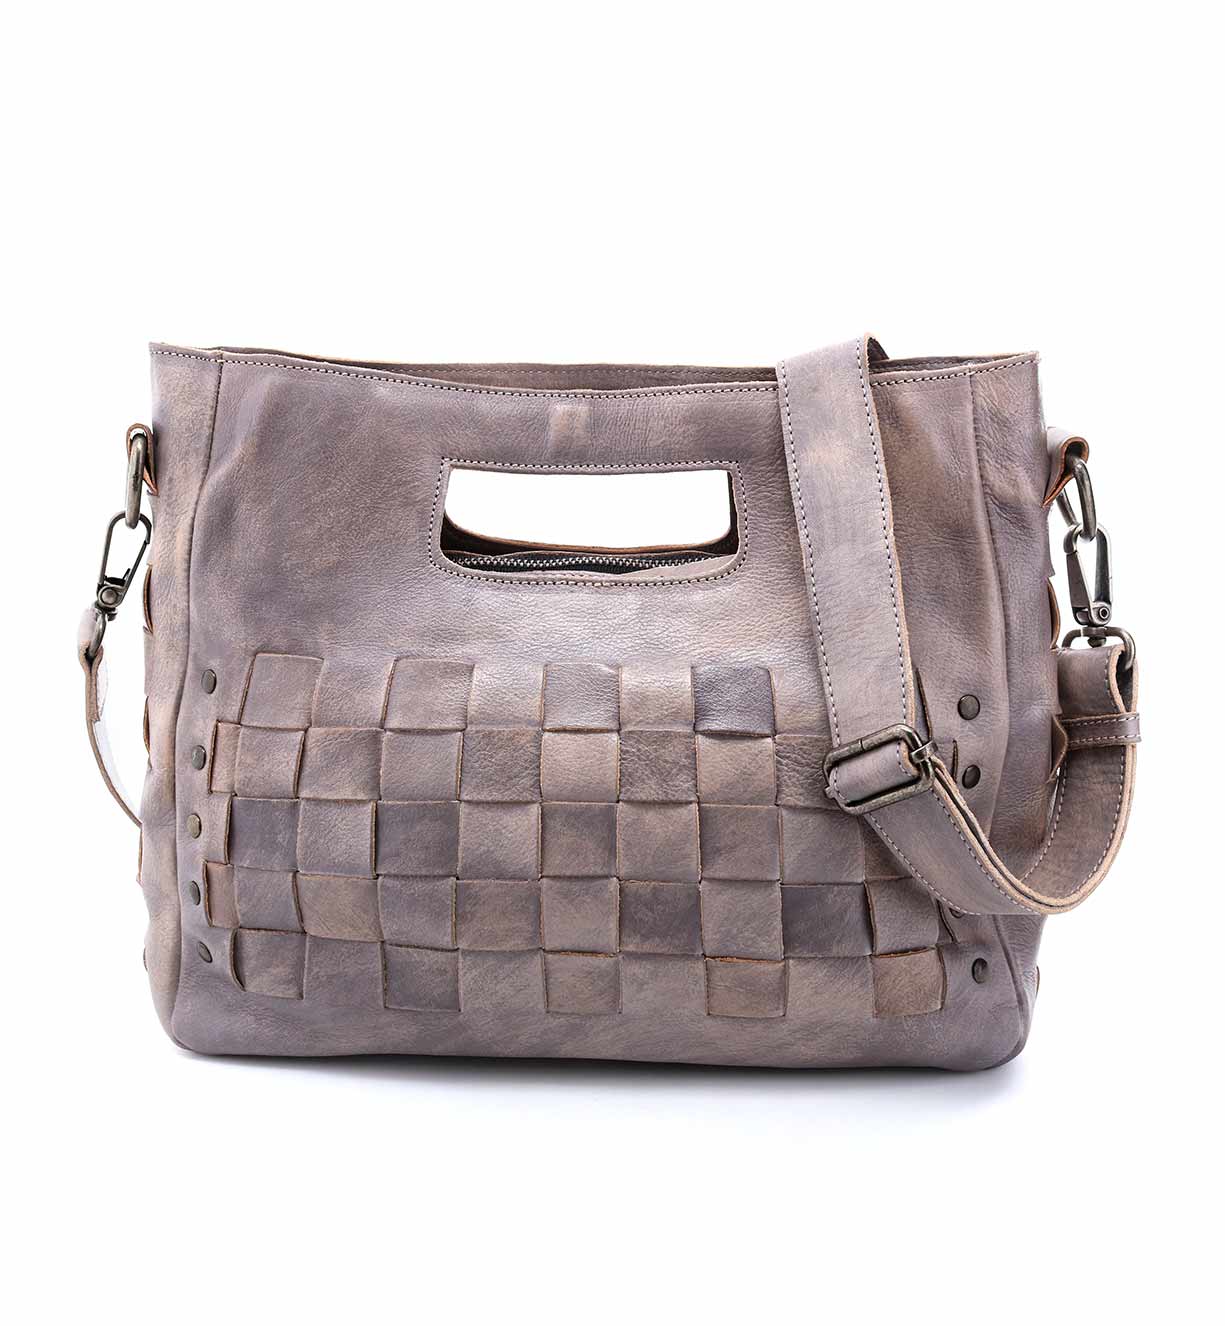 A Bed Stu Orchid grey leather bag with a strap and handles.